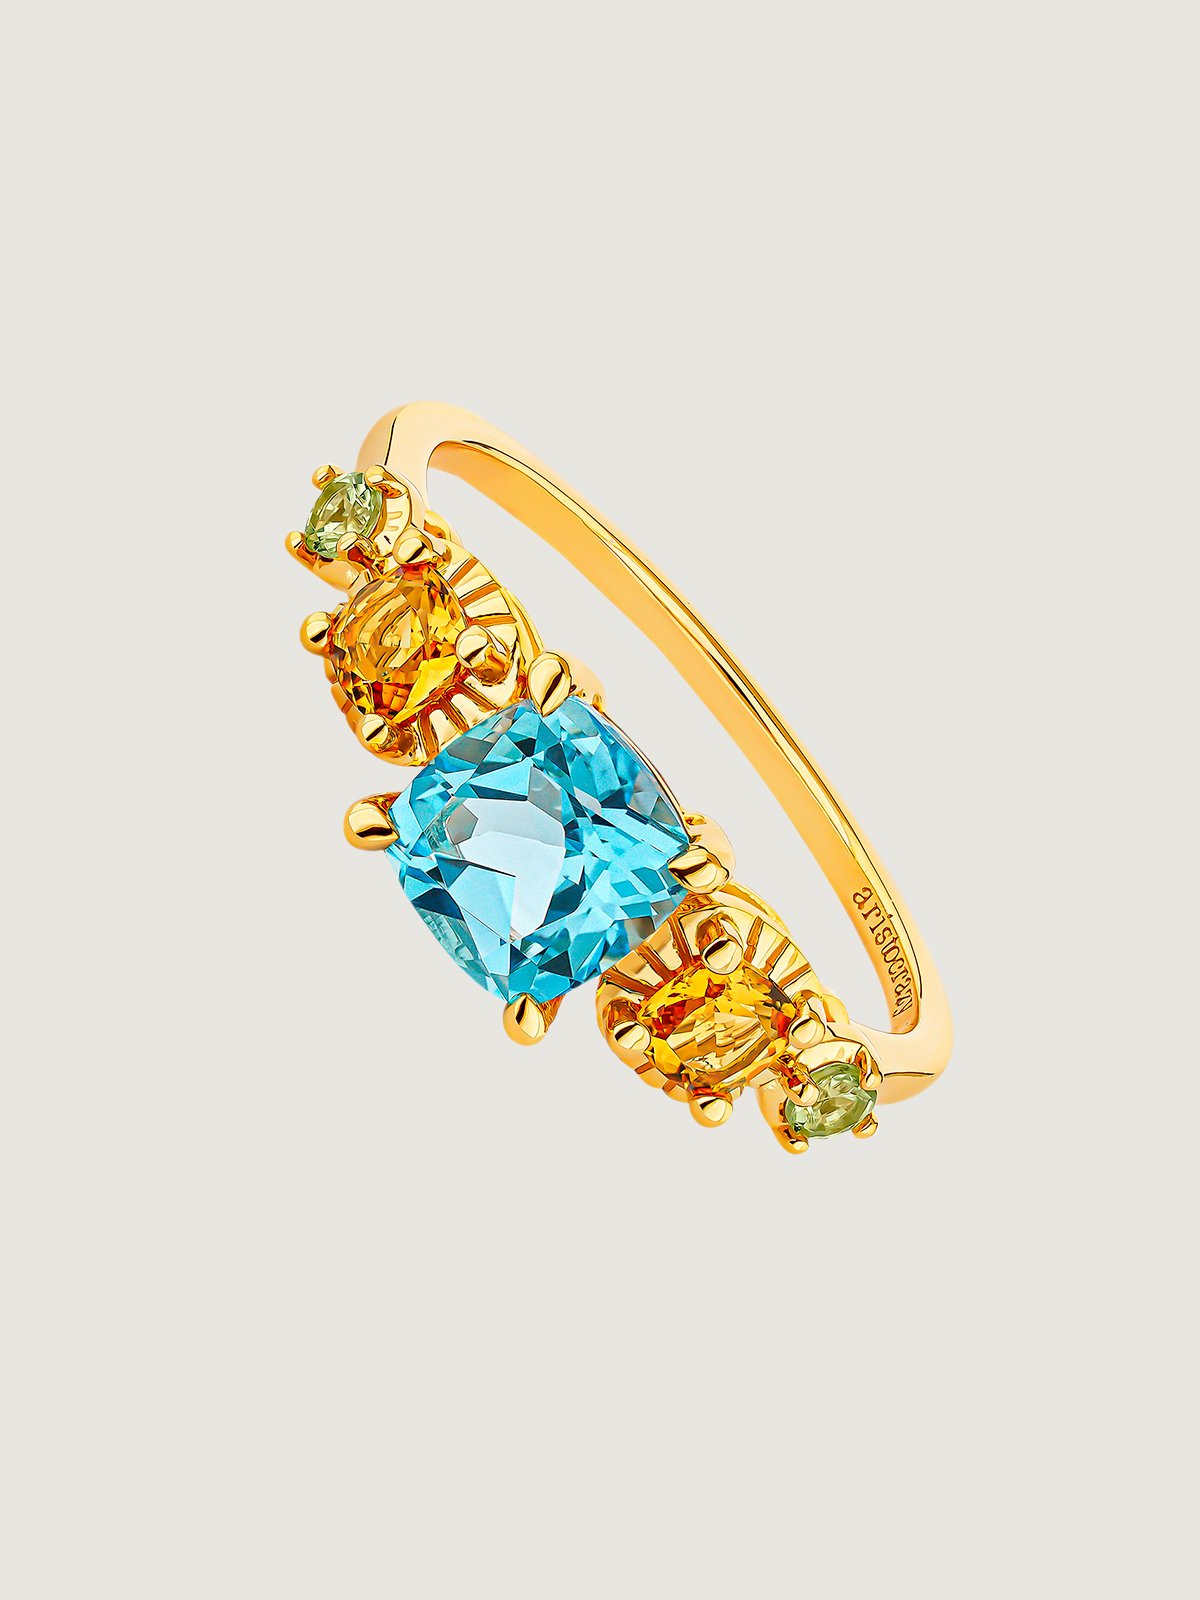 925 Silver cinquillo ring bathed in 18K yellow gold with Swiss blue topaz, citrine quartz, and green peridots.